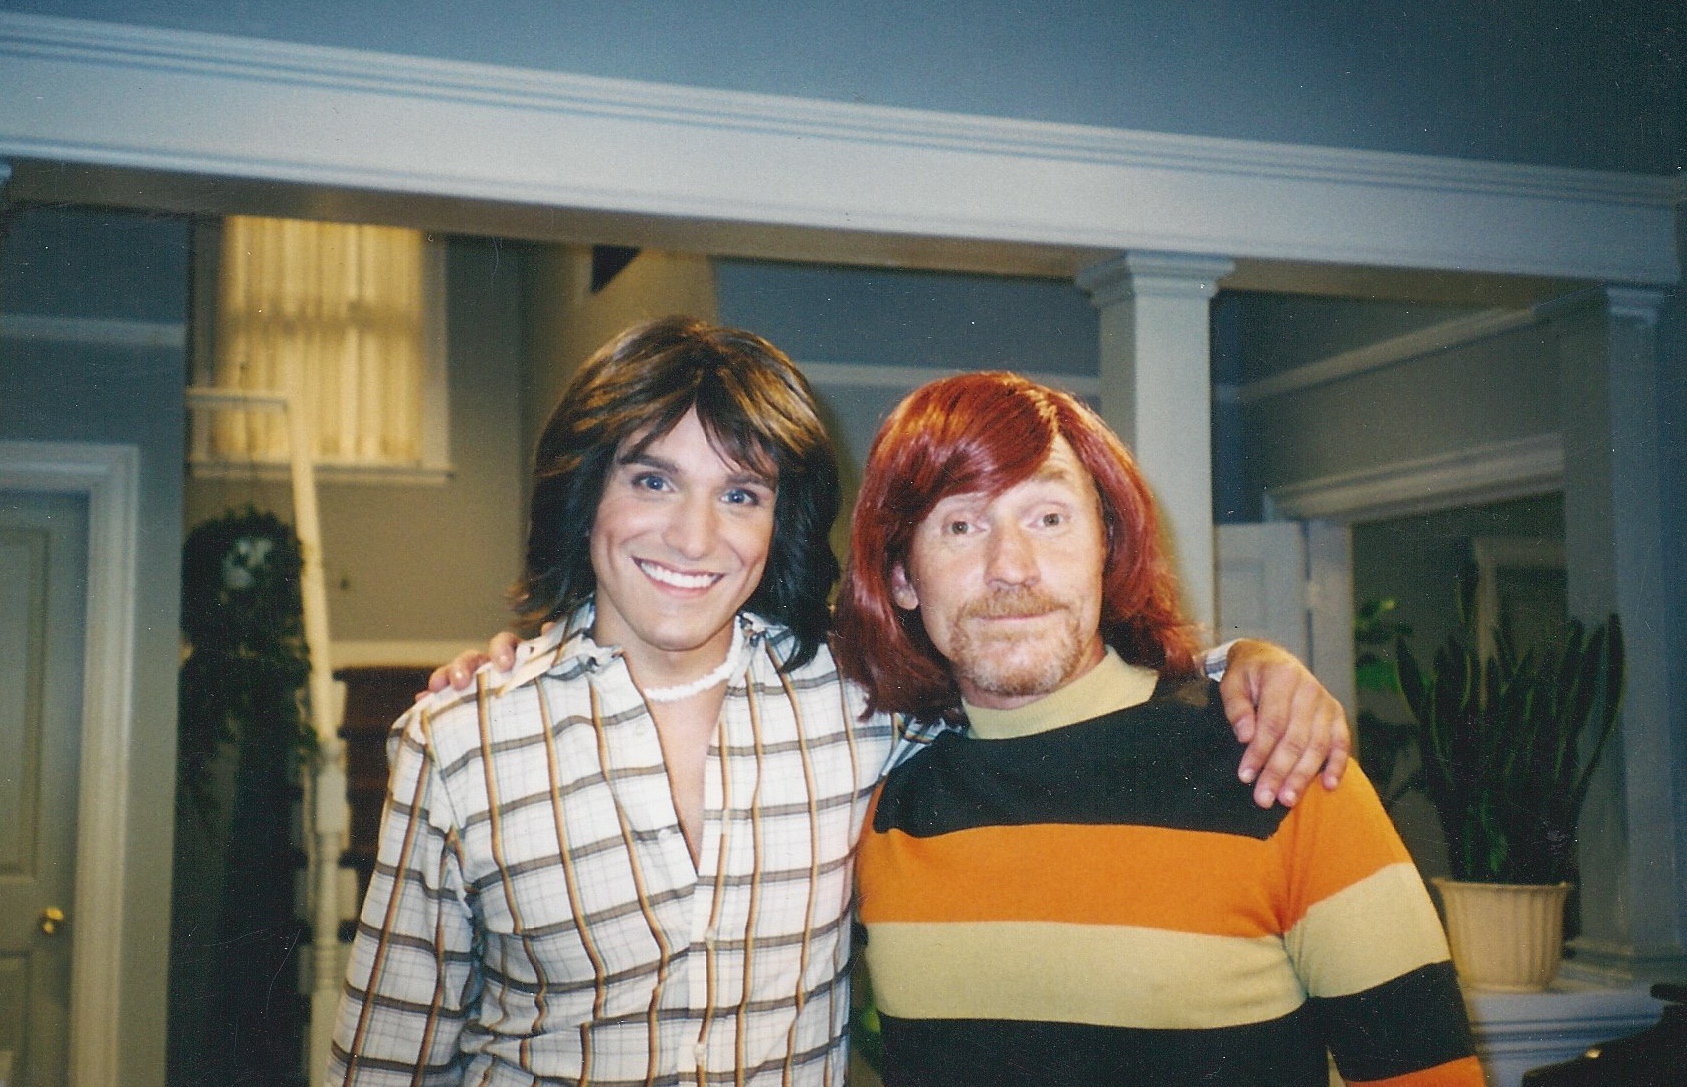 Playing Keith Partridge in The Partridge Family with Danny Bonaduce on the set of NBC's 